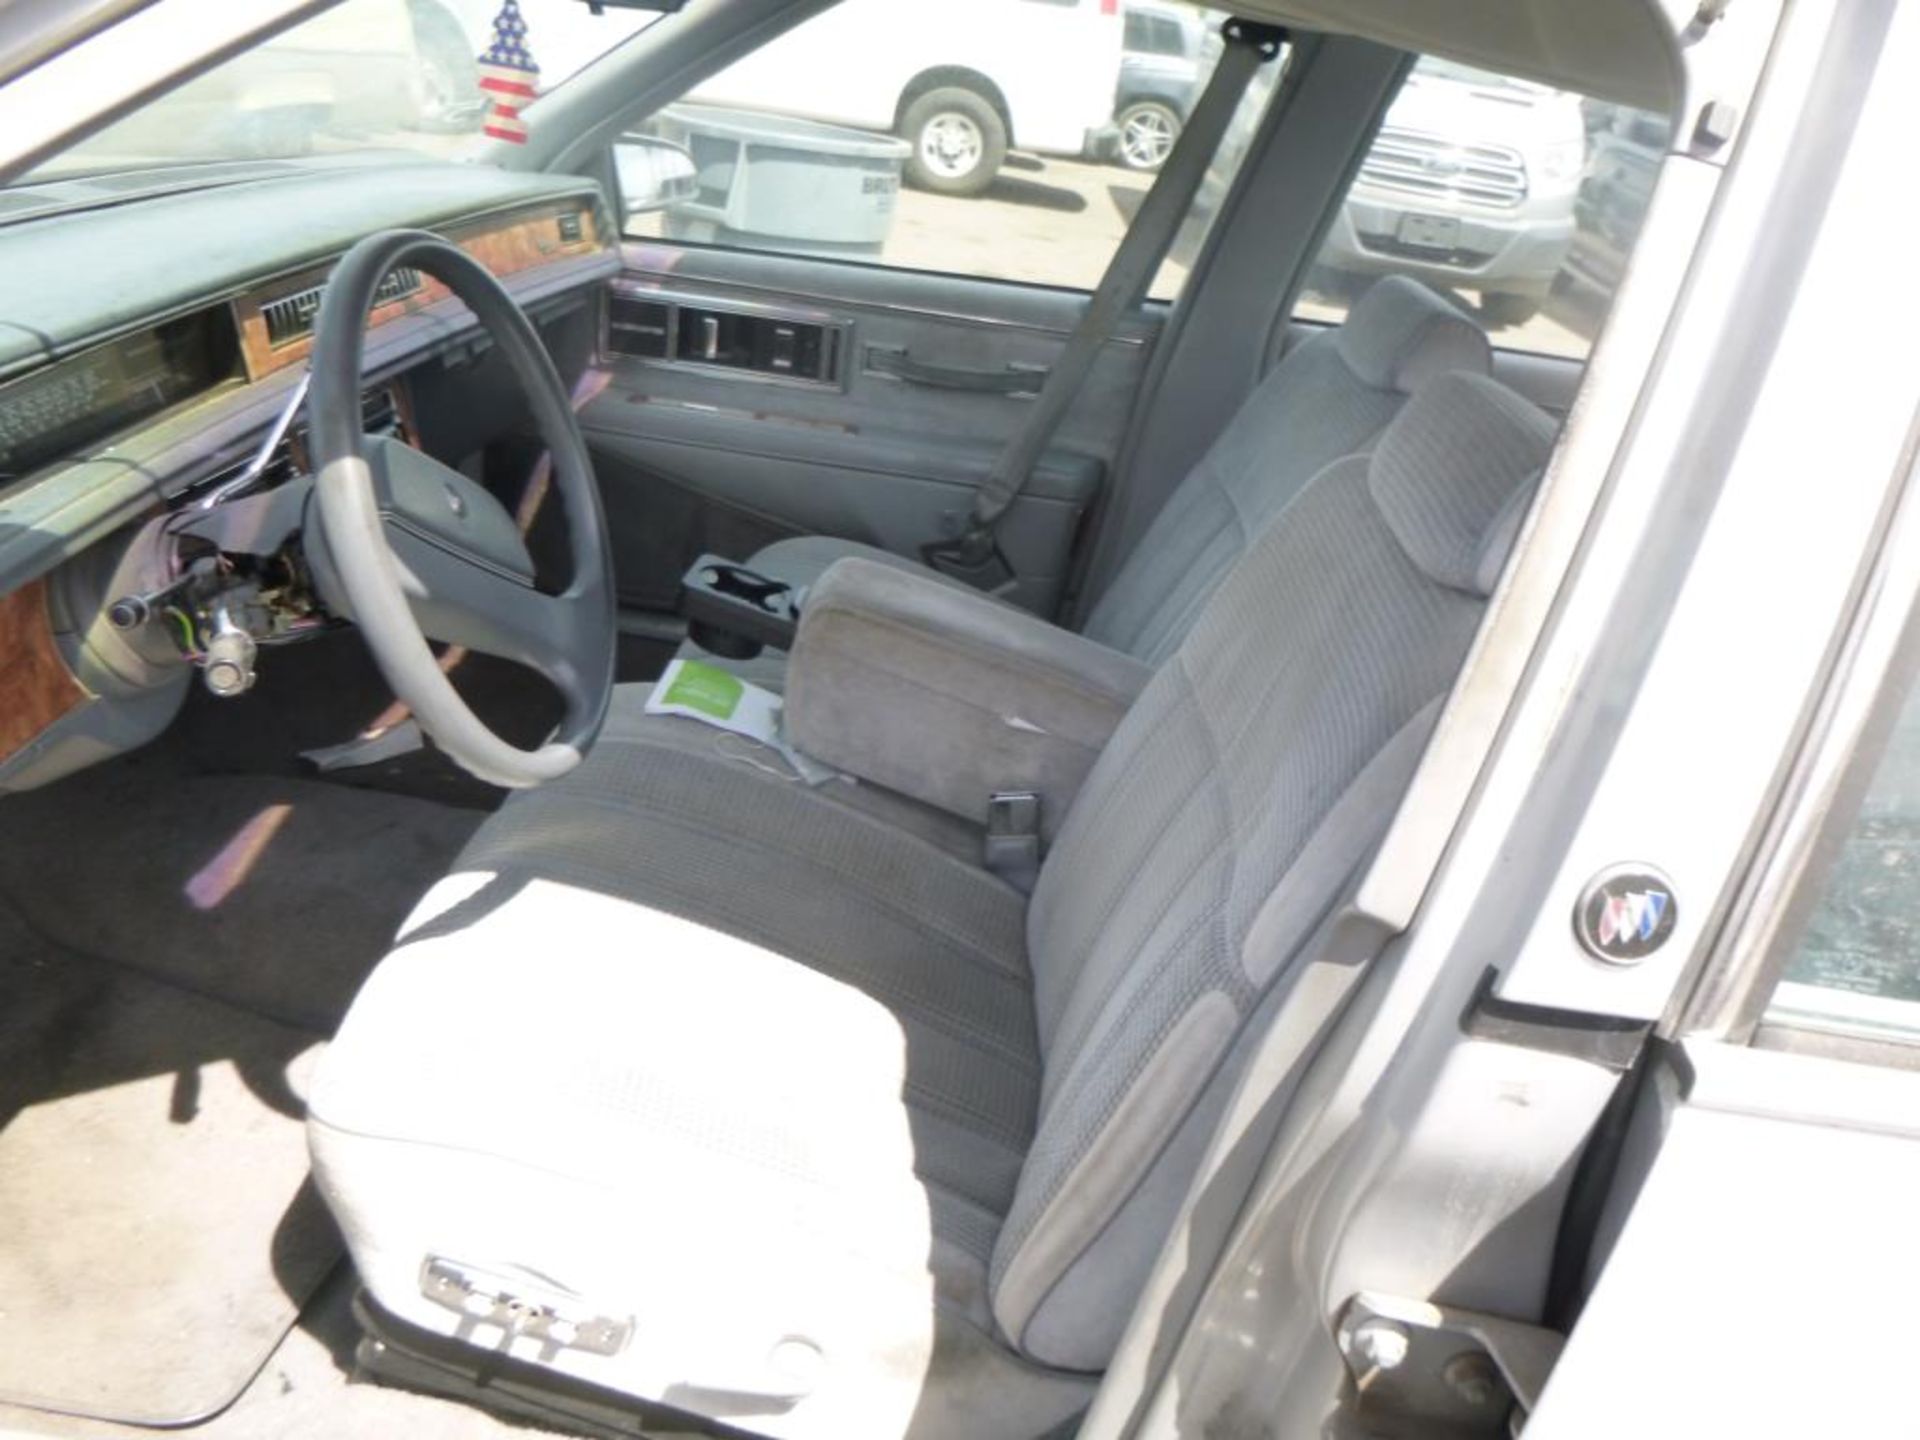 1990 Buick LeSabre - Image 11 of 15